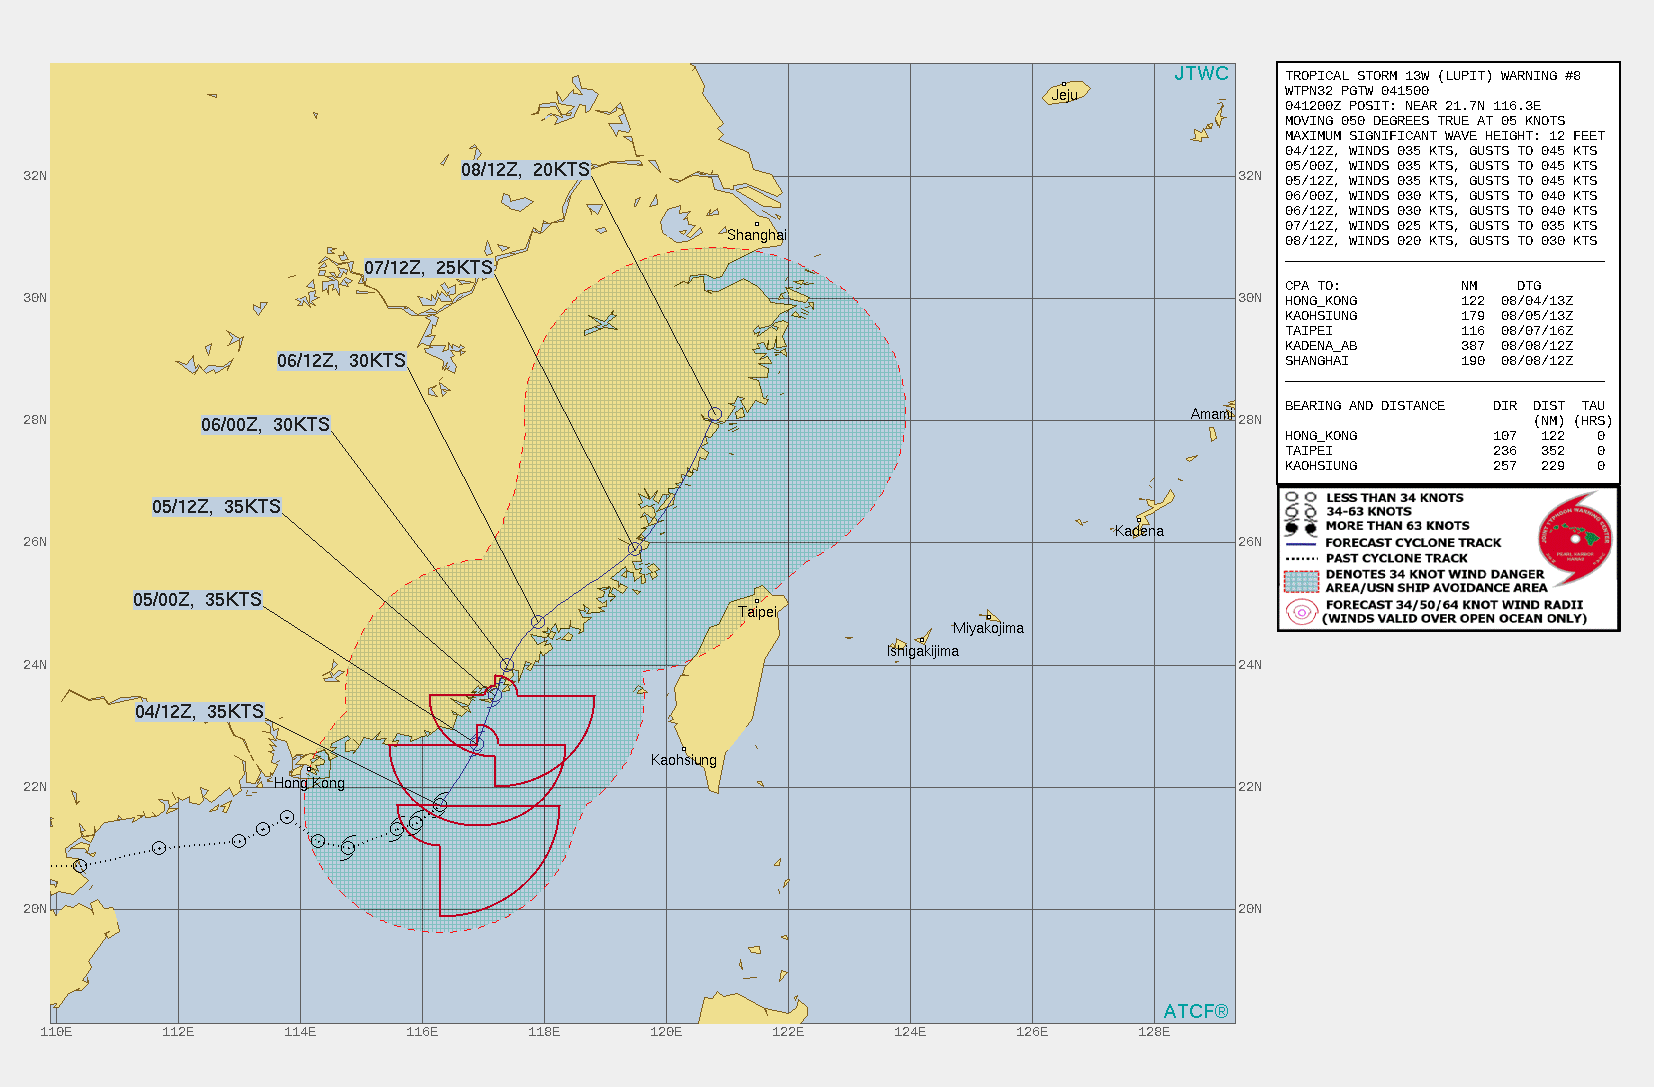 TS 13W(LUPIT). WARNING 8 ISSUED AT 04/15UTC.THERE ARE NO SIGNIFICANT CHANGES TO THE FORECAST FROM THE PREVIOUS WARNING.  FORECAST DISCUSSION: UNDER THE STEERING INFLUENCE OF THE NEAR EQUATORIAL RIDGE, TS LUPIT WILL CONTINUE ON A NORTHEASTWARD TRACK, MAKING LANDFALL AT 24H JUST SOUTH OF XIAMEN, CHINA, AND TRACK ALONG THE COASTLINE. THE MARGINALLY FAVORABLE ENVIRONMENT WILL SUSTAIN ITS CURRENT INTENSITY UP TO LANDFALL. AFTERWARD, LAND INTERACTION PLUS THE HIGH VWS WILL ERODE THE SYSTEM TOWARD DISSIPATION BY 96H, POSSIBLY SOONER.